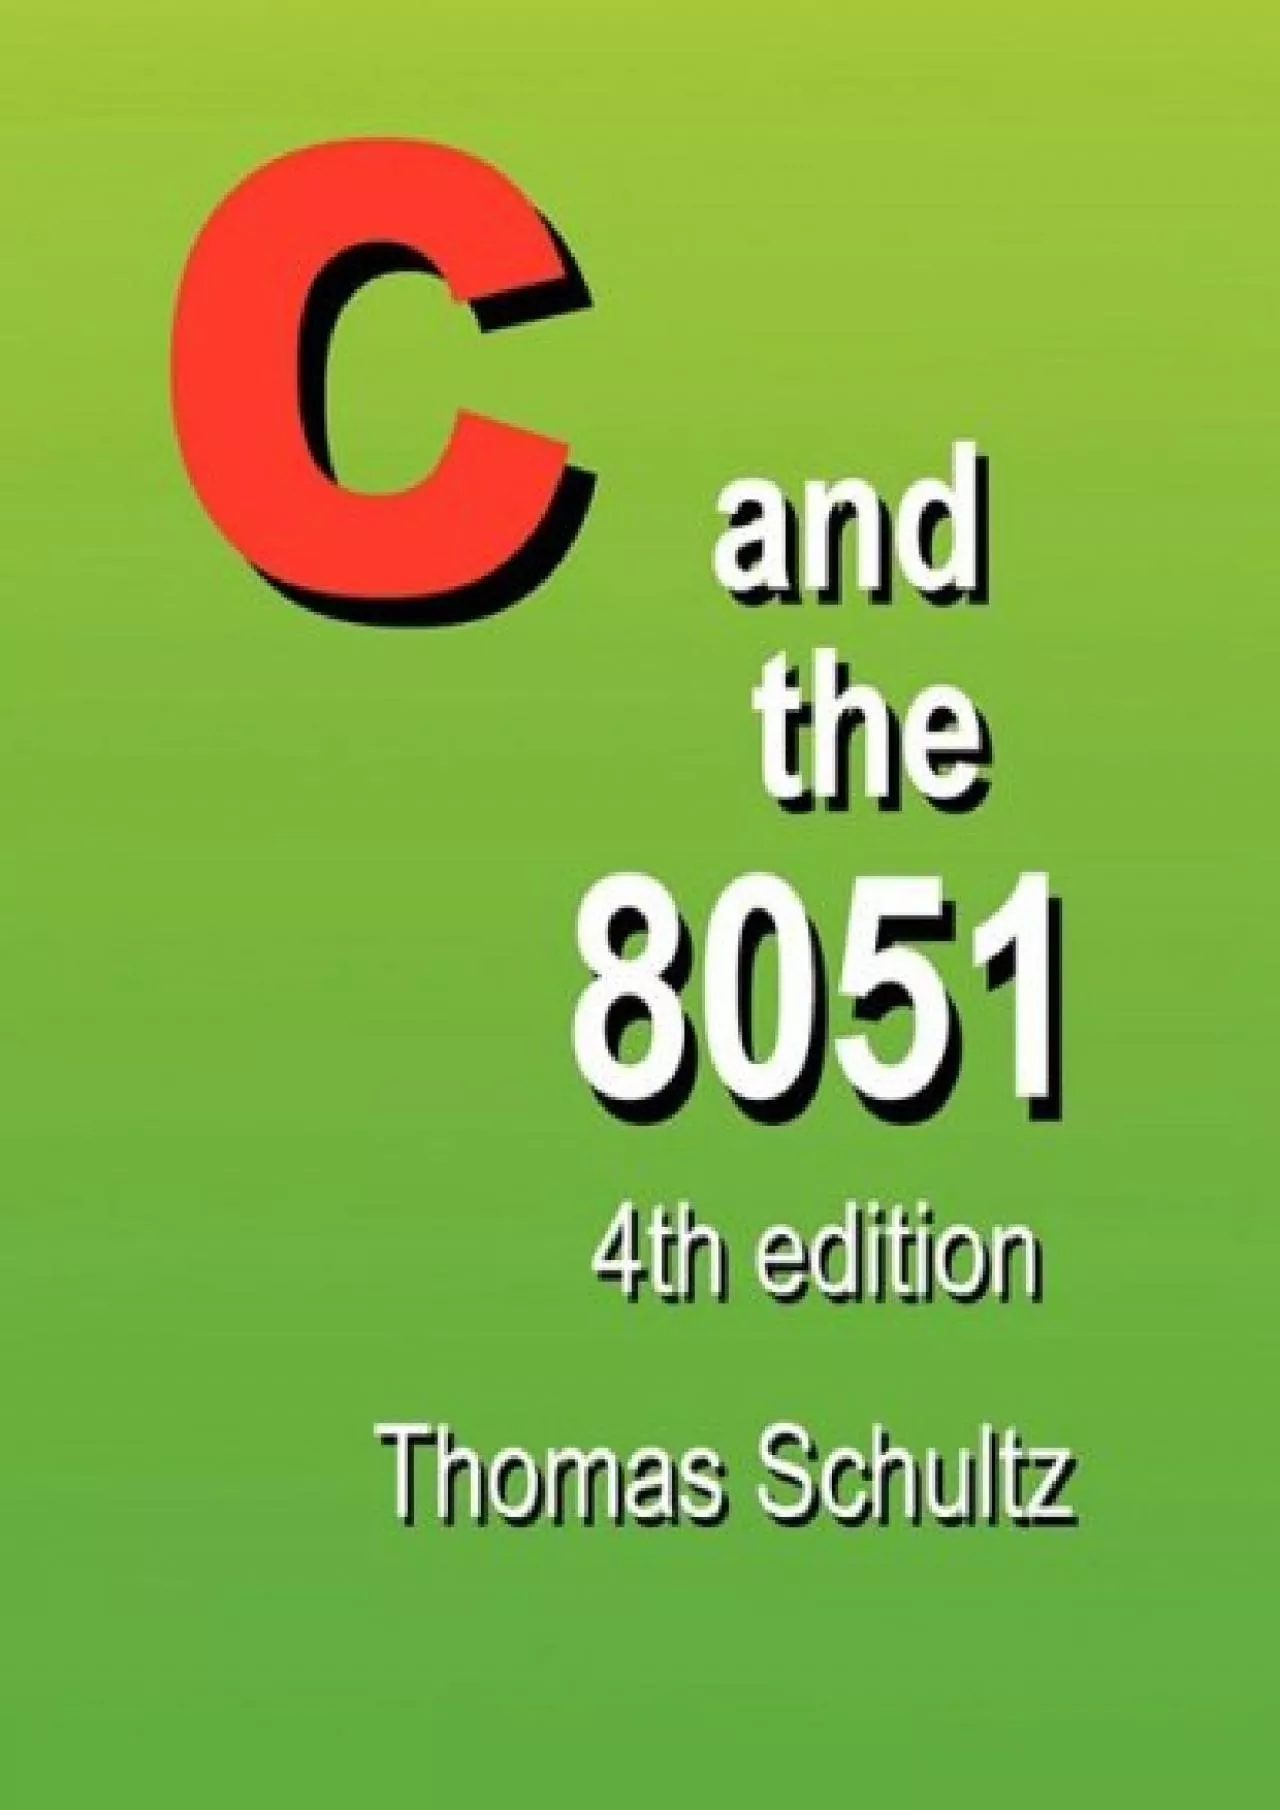 [READ]-C and the 8051 (4th Edition)